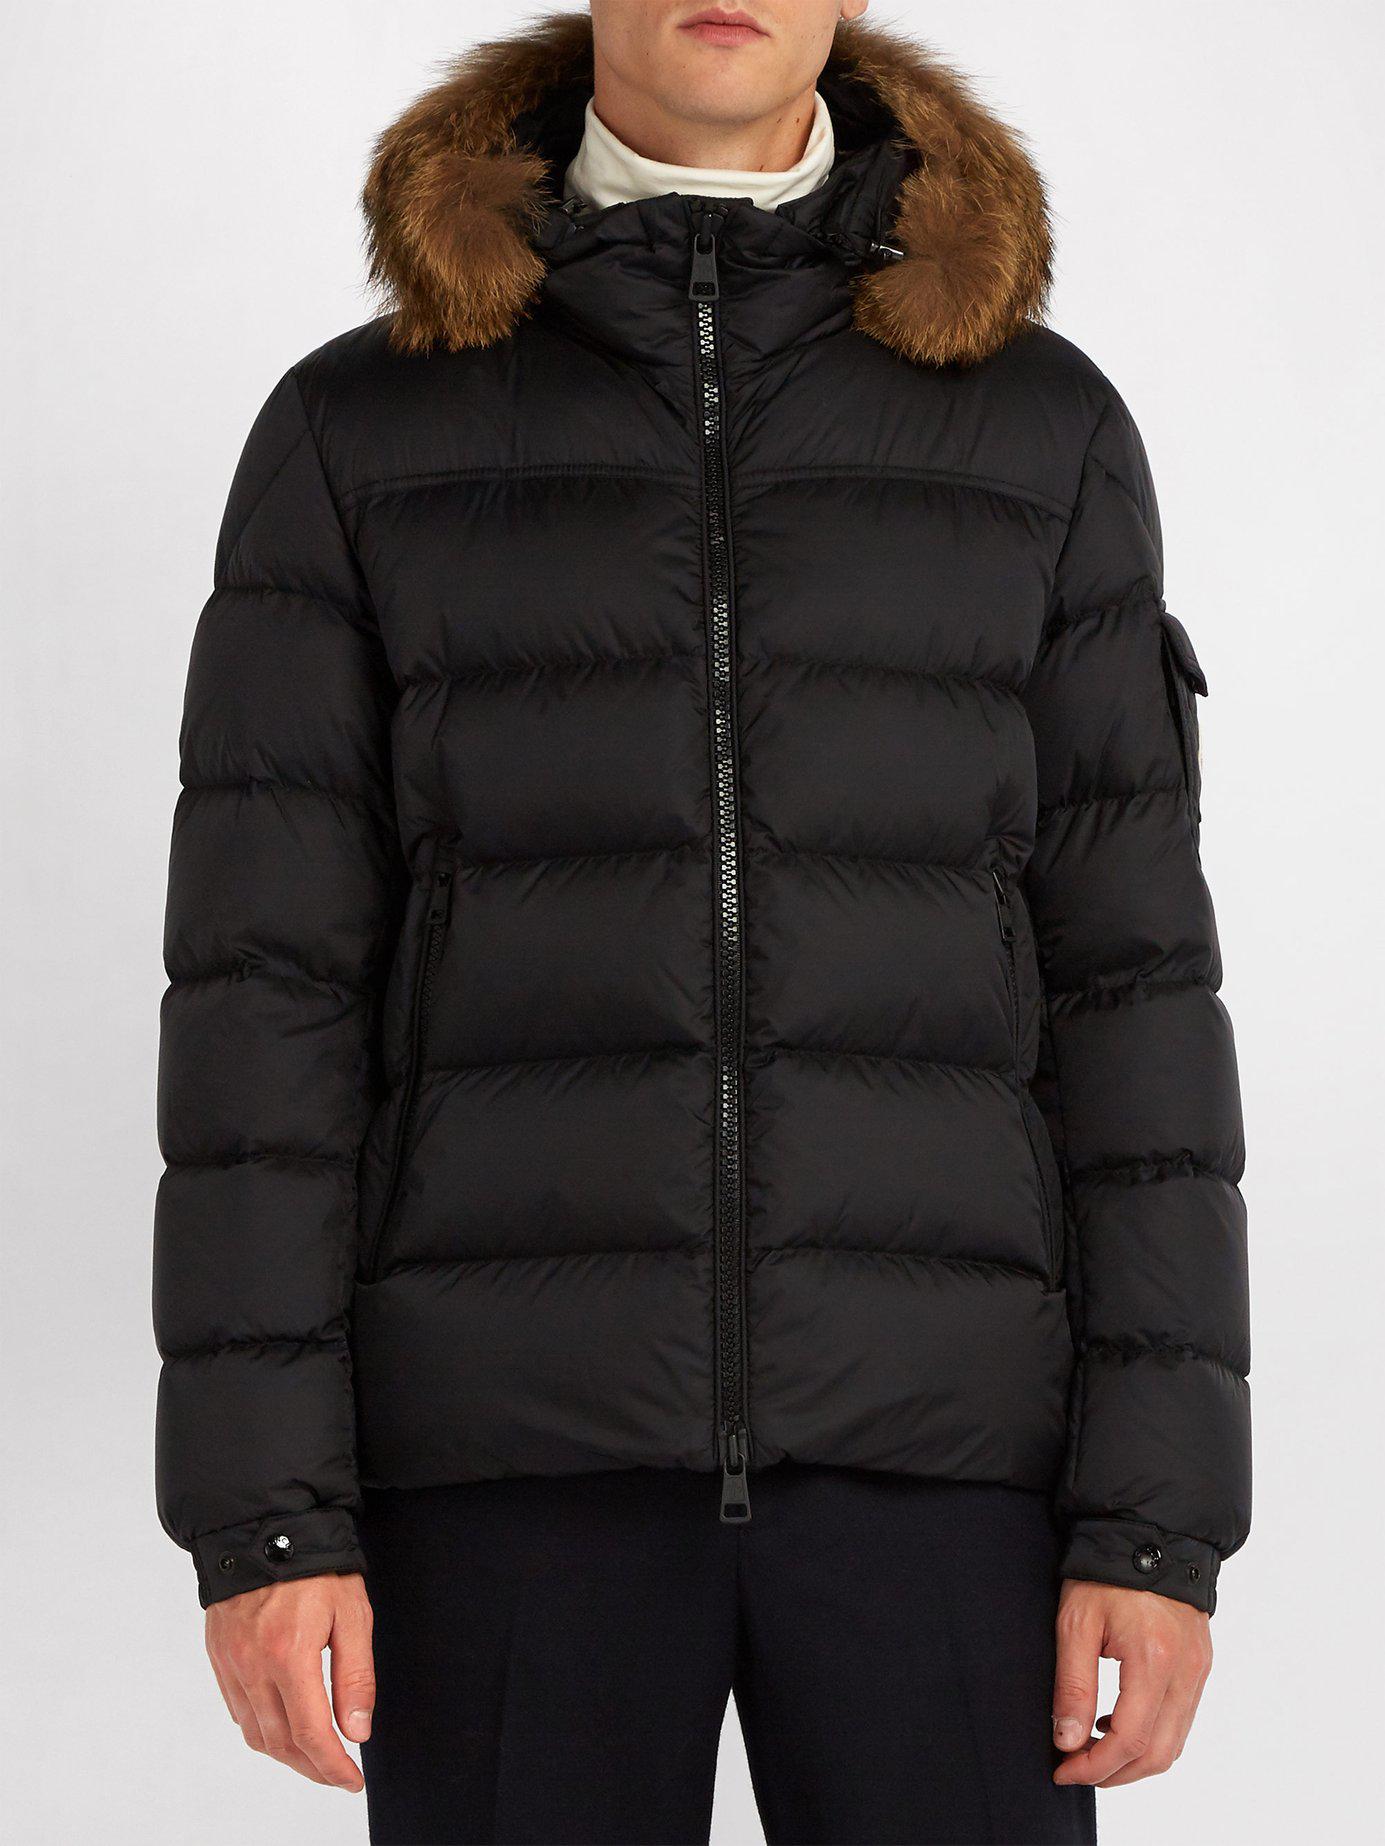 Moncler Marque Quilted-down Jacket in Black for Men | Lyst